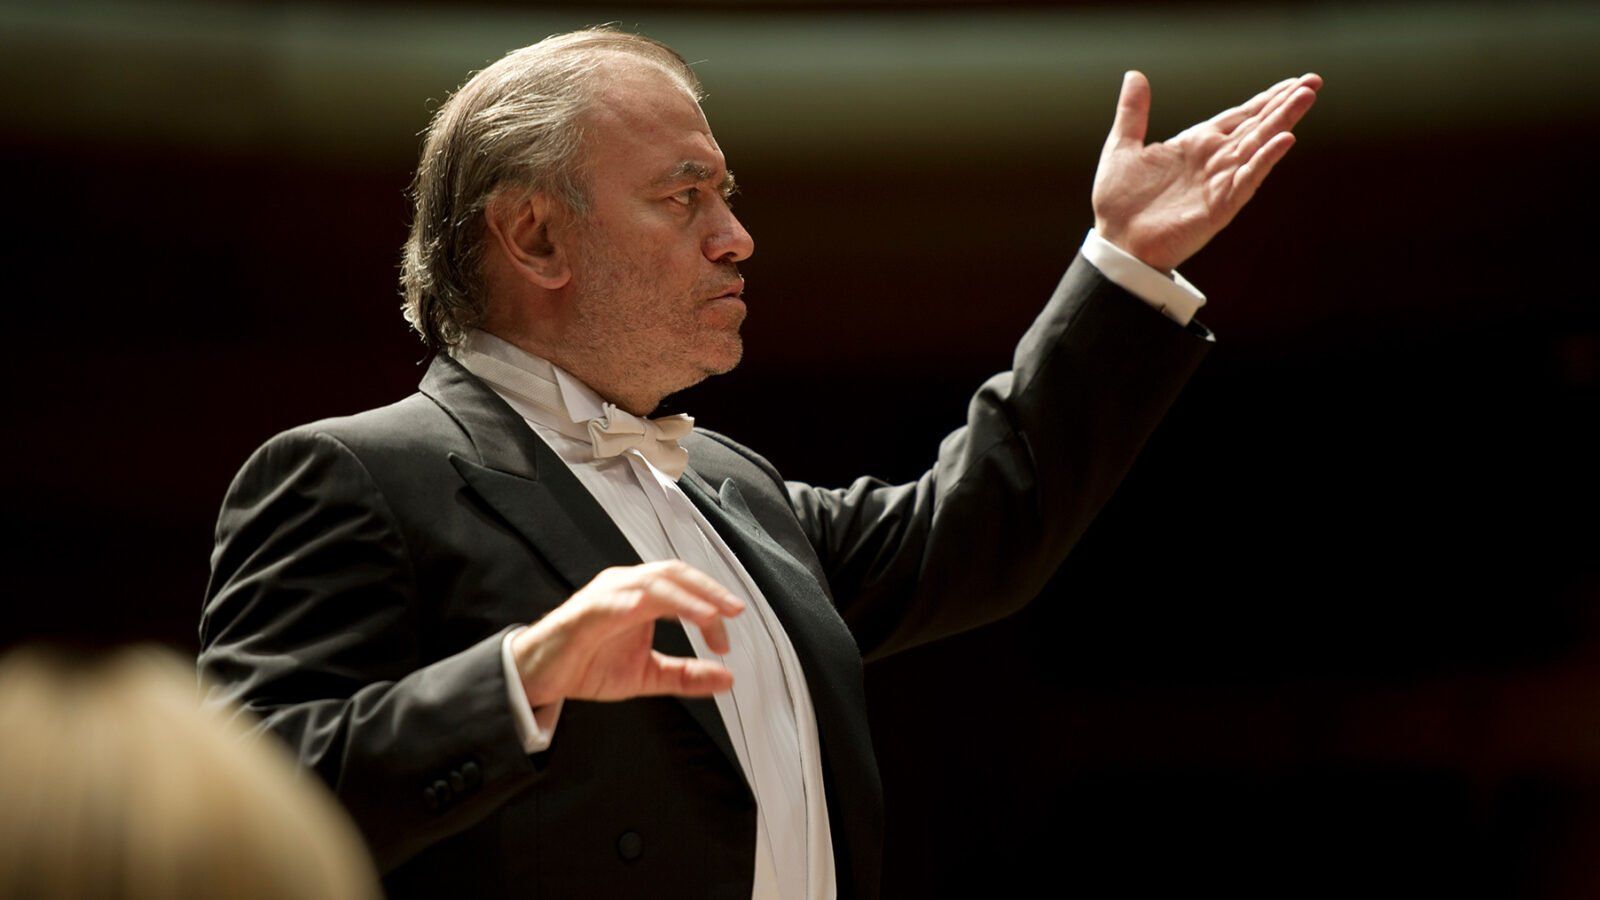 Featured image for “Gergiev, Putin friend, out of Vienna Philharmonic US tour”